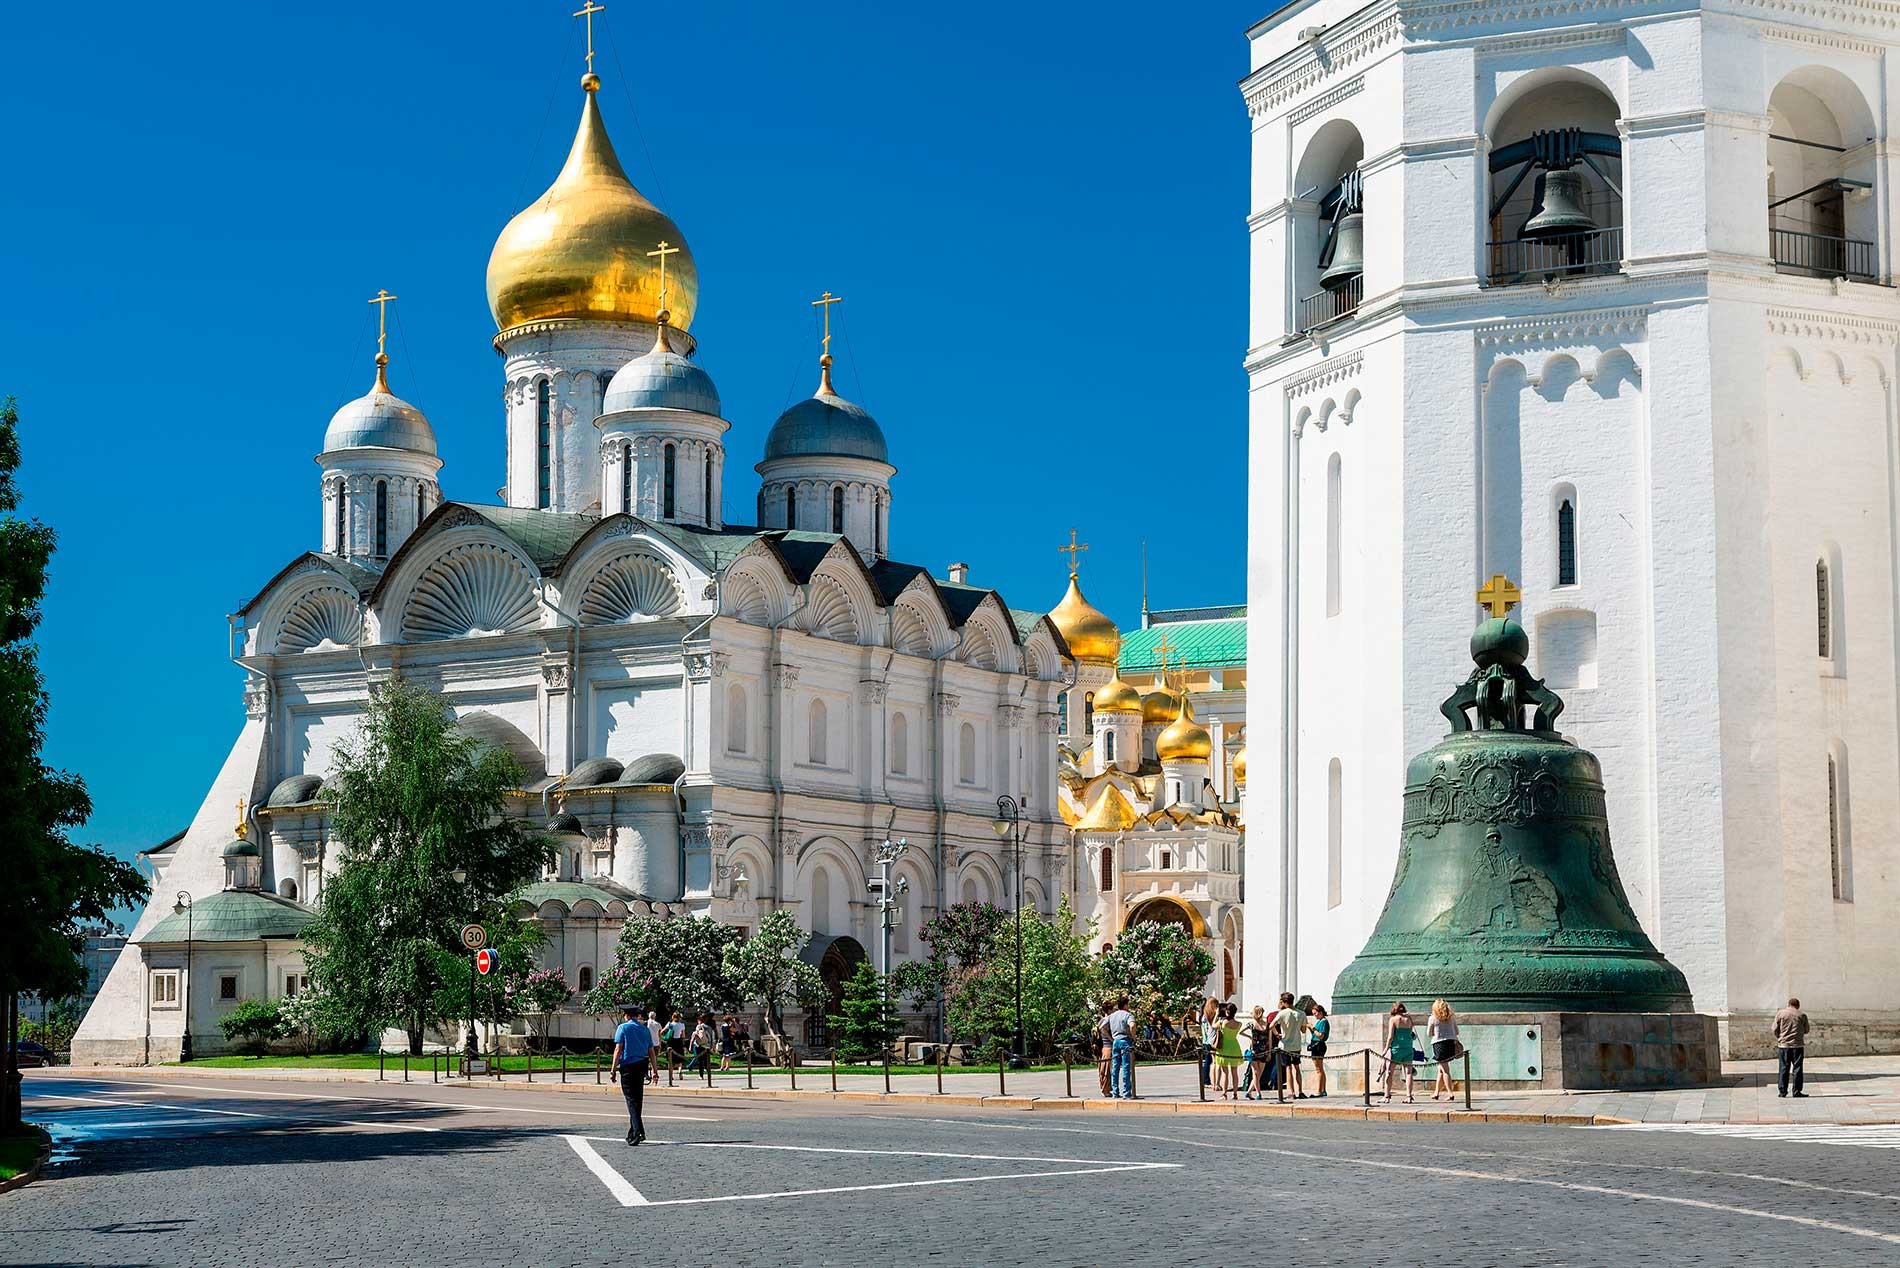 L-R: Cathedral of the Archangel, Cathedral of the Annunciation, Ivan the Great Bell Tower, Tsar Bell